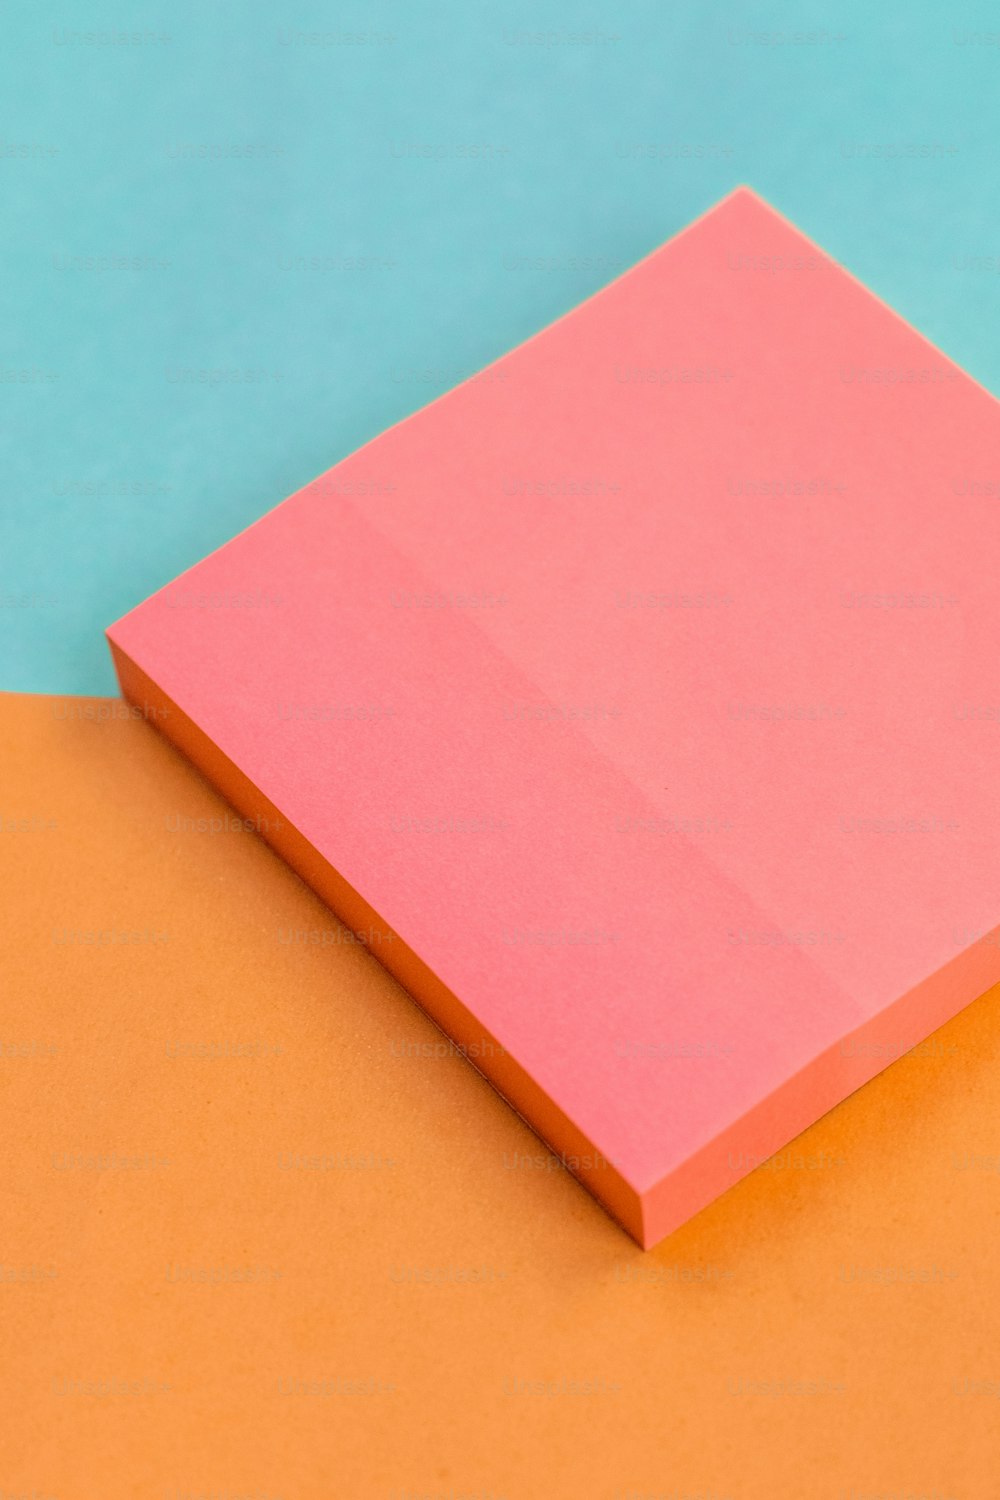 a piece of pink paper sitting on top of an orange and blue surface